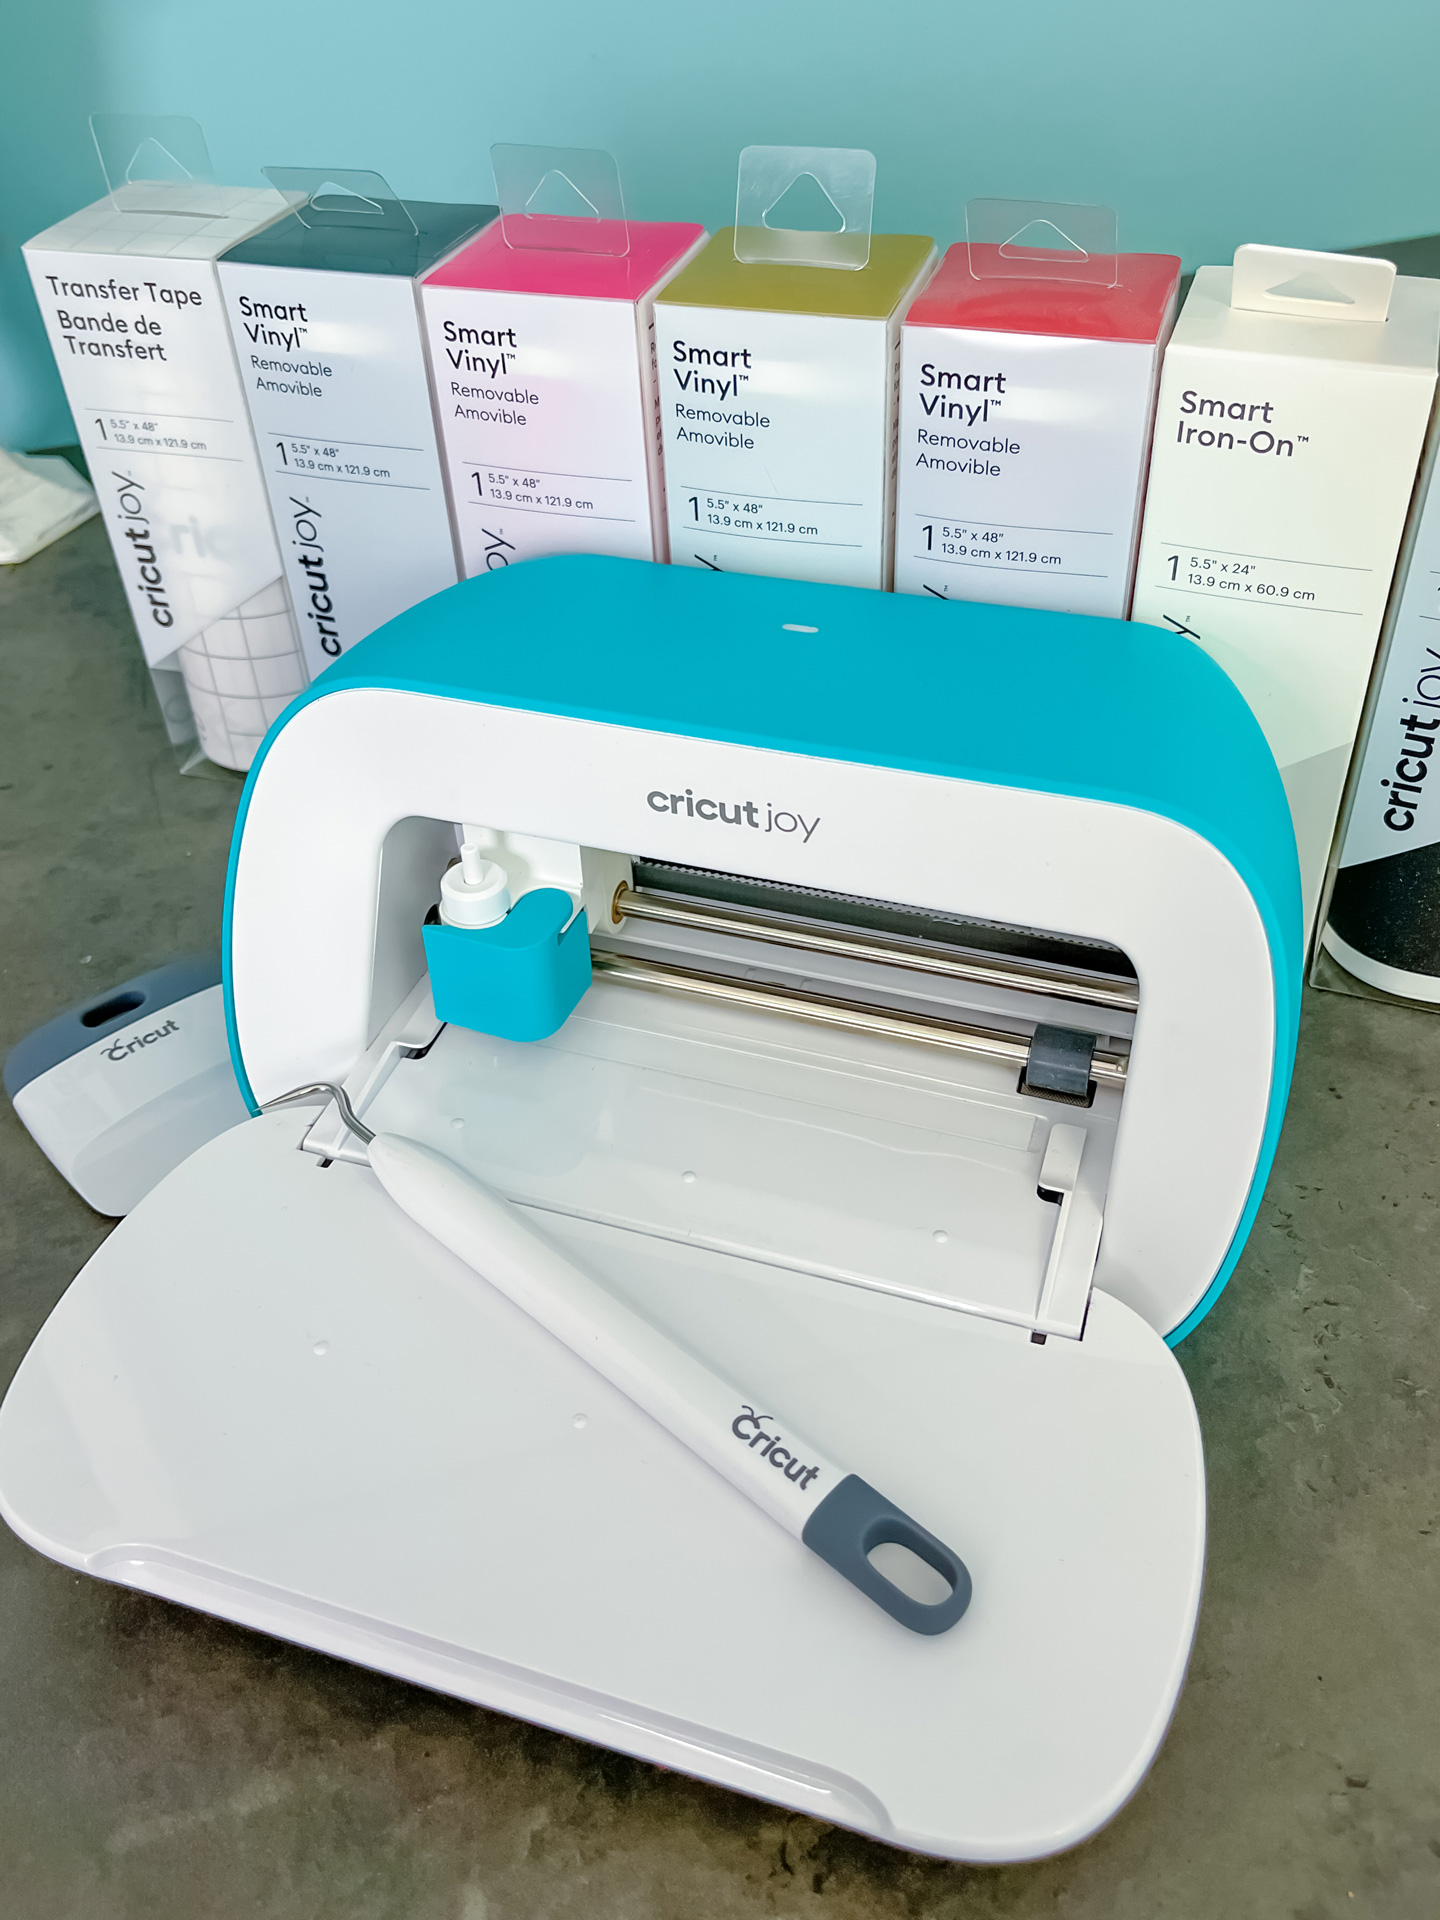 How to Use Cricut Pens to Make (Gorgeous) Custom Labels - The